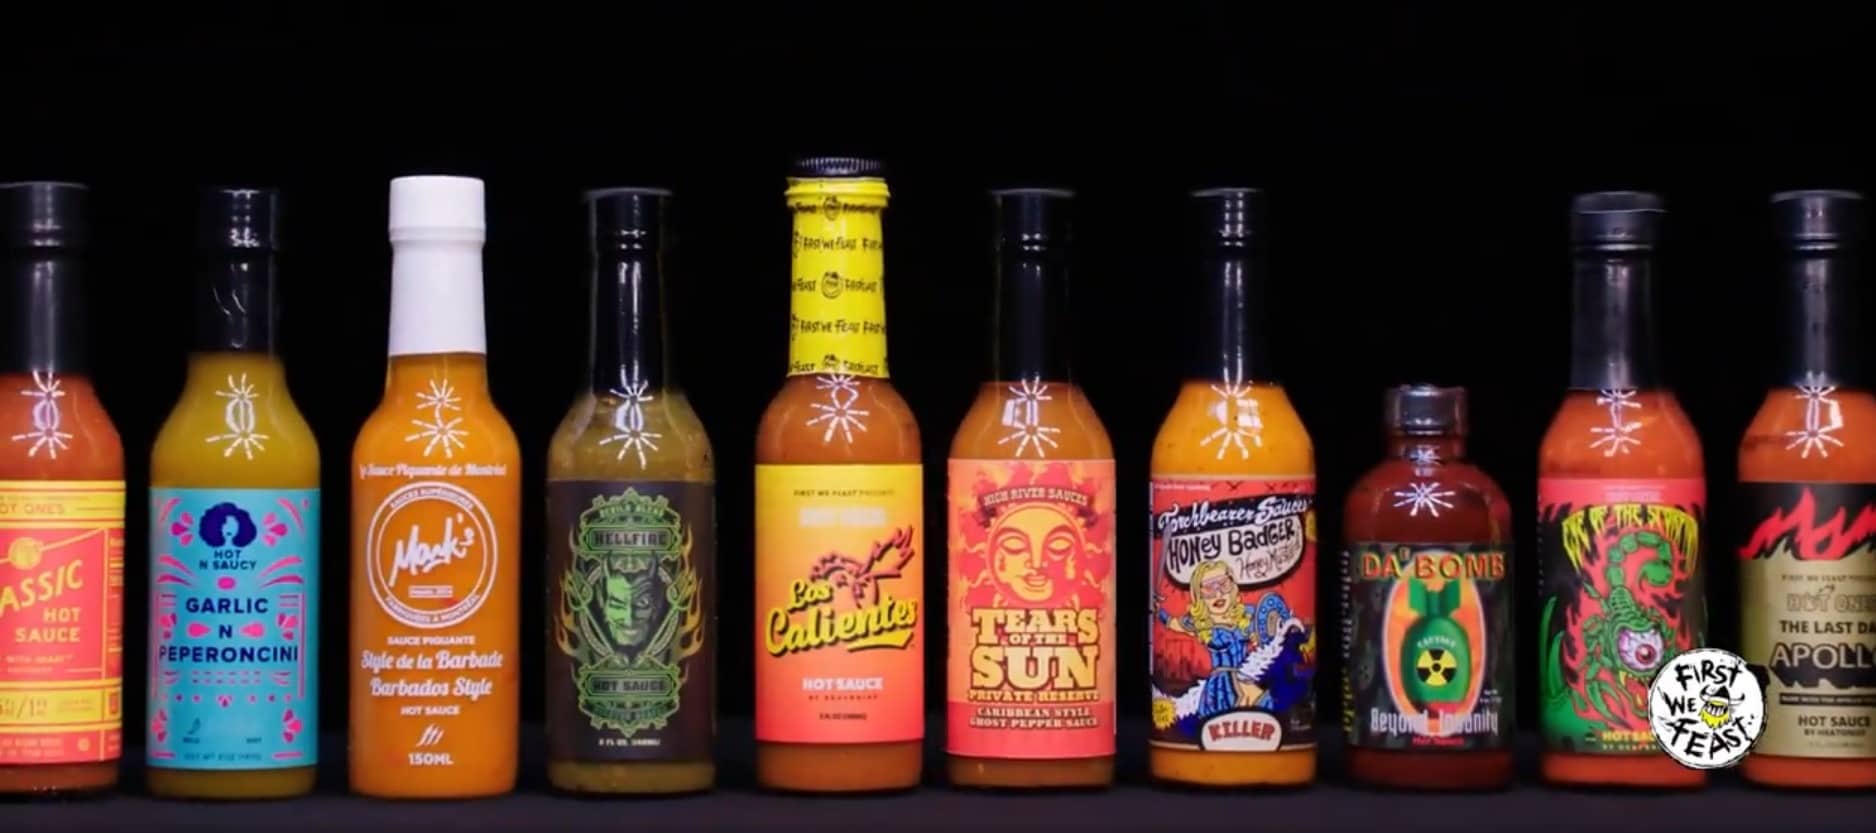 Hot Ones Hot Sauce Los Calientes Grill Pack